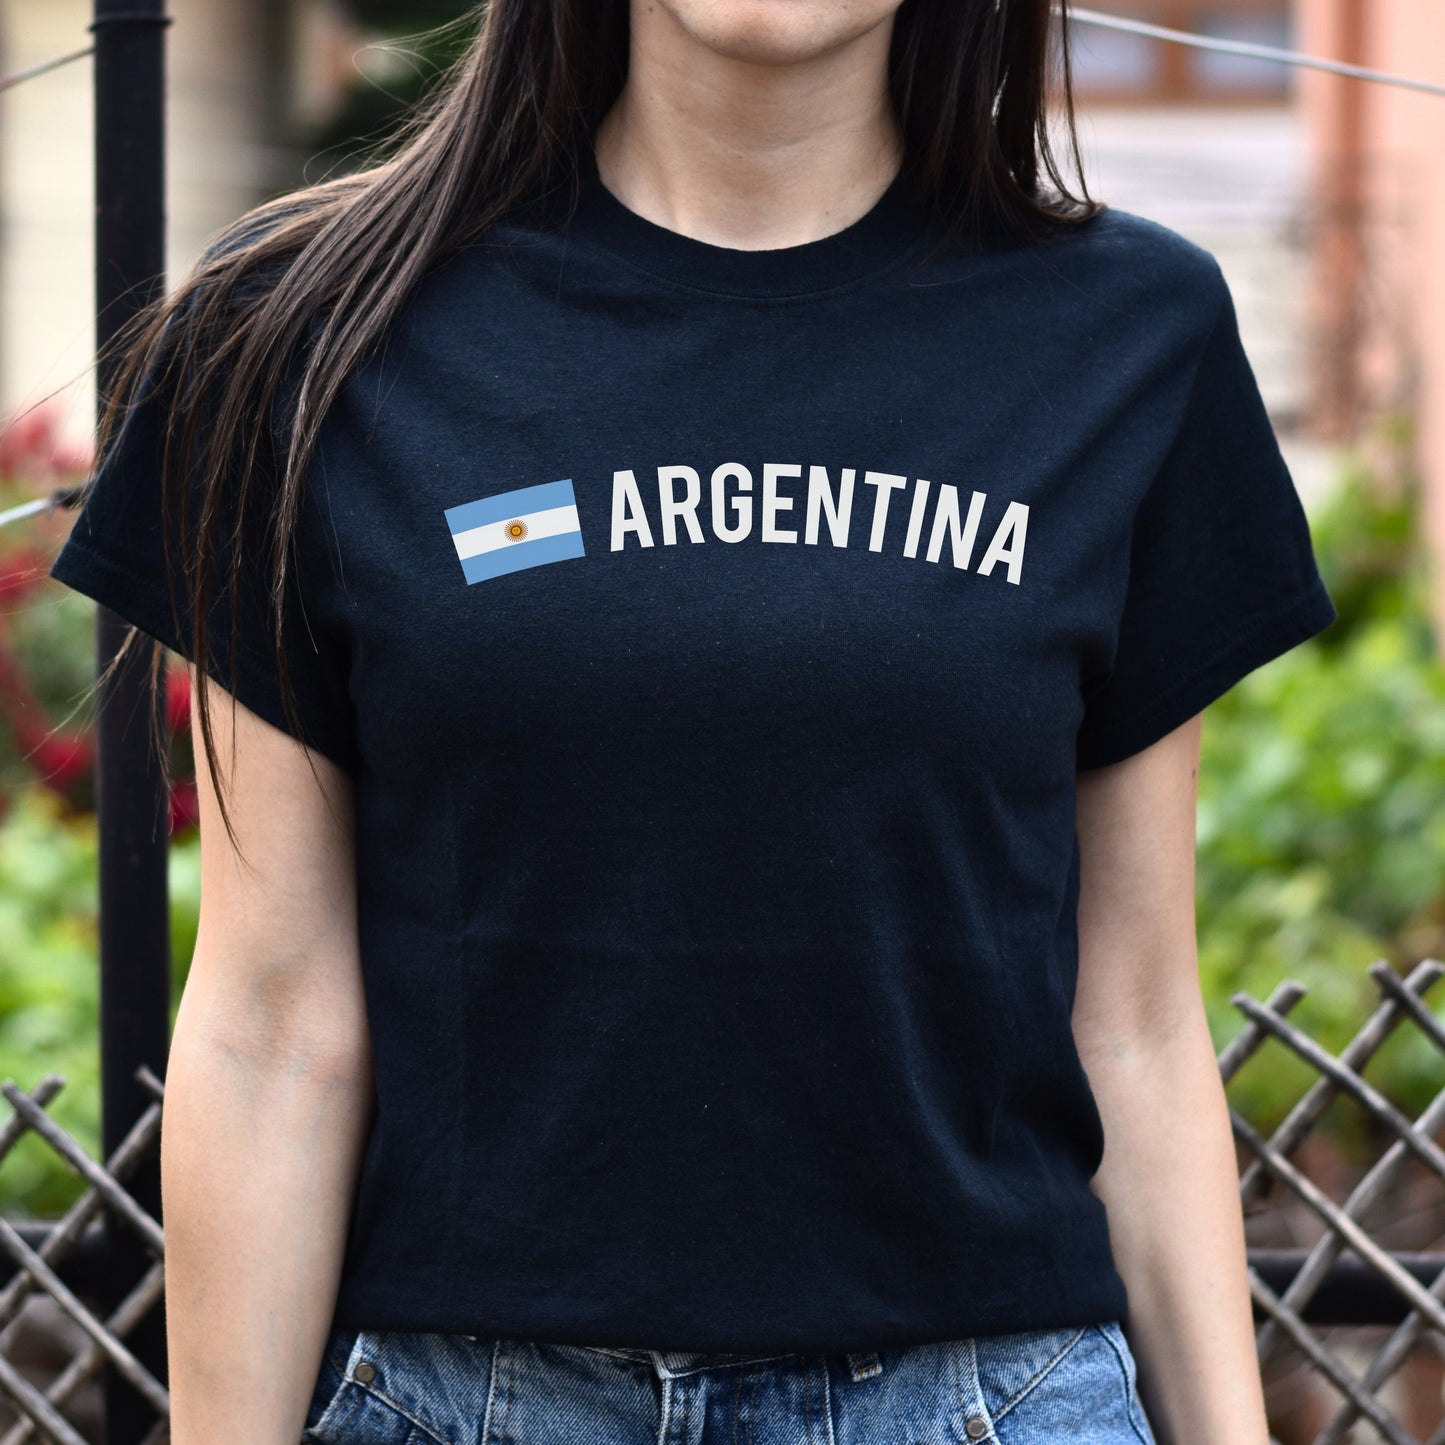 Argentina Unisex T-shirt gift Argentinian flag tee Buenos Aires White Black Dark Heather-Black-Family-Gift-Planet